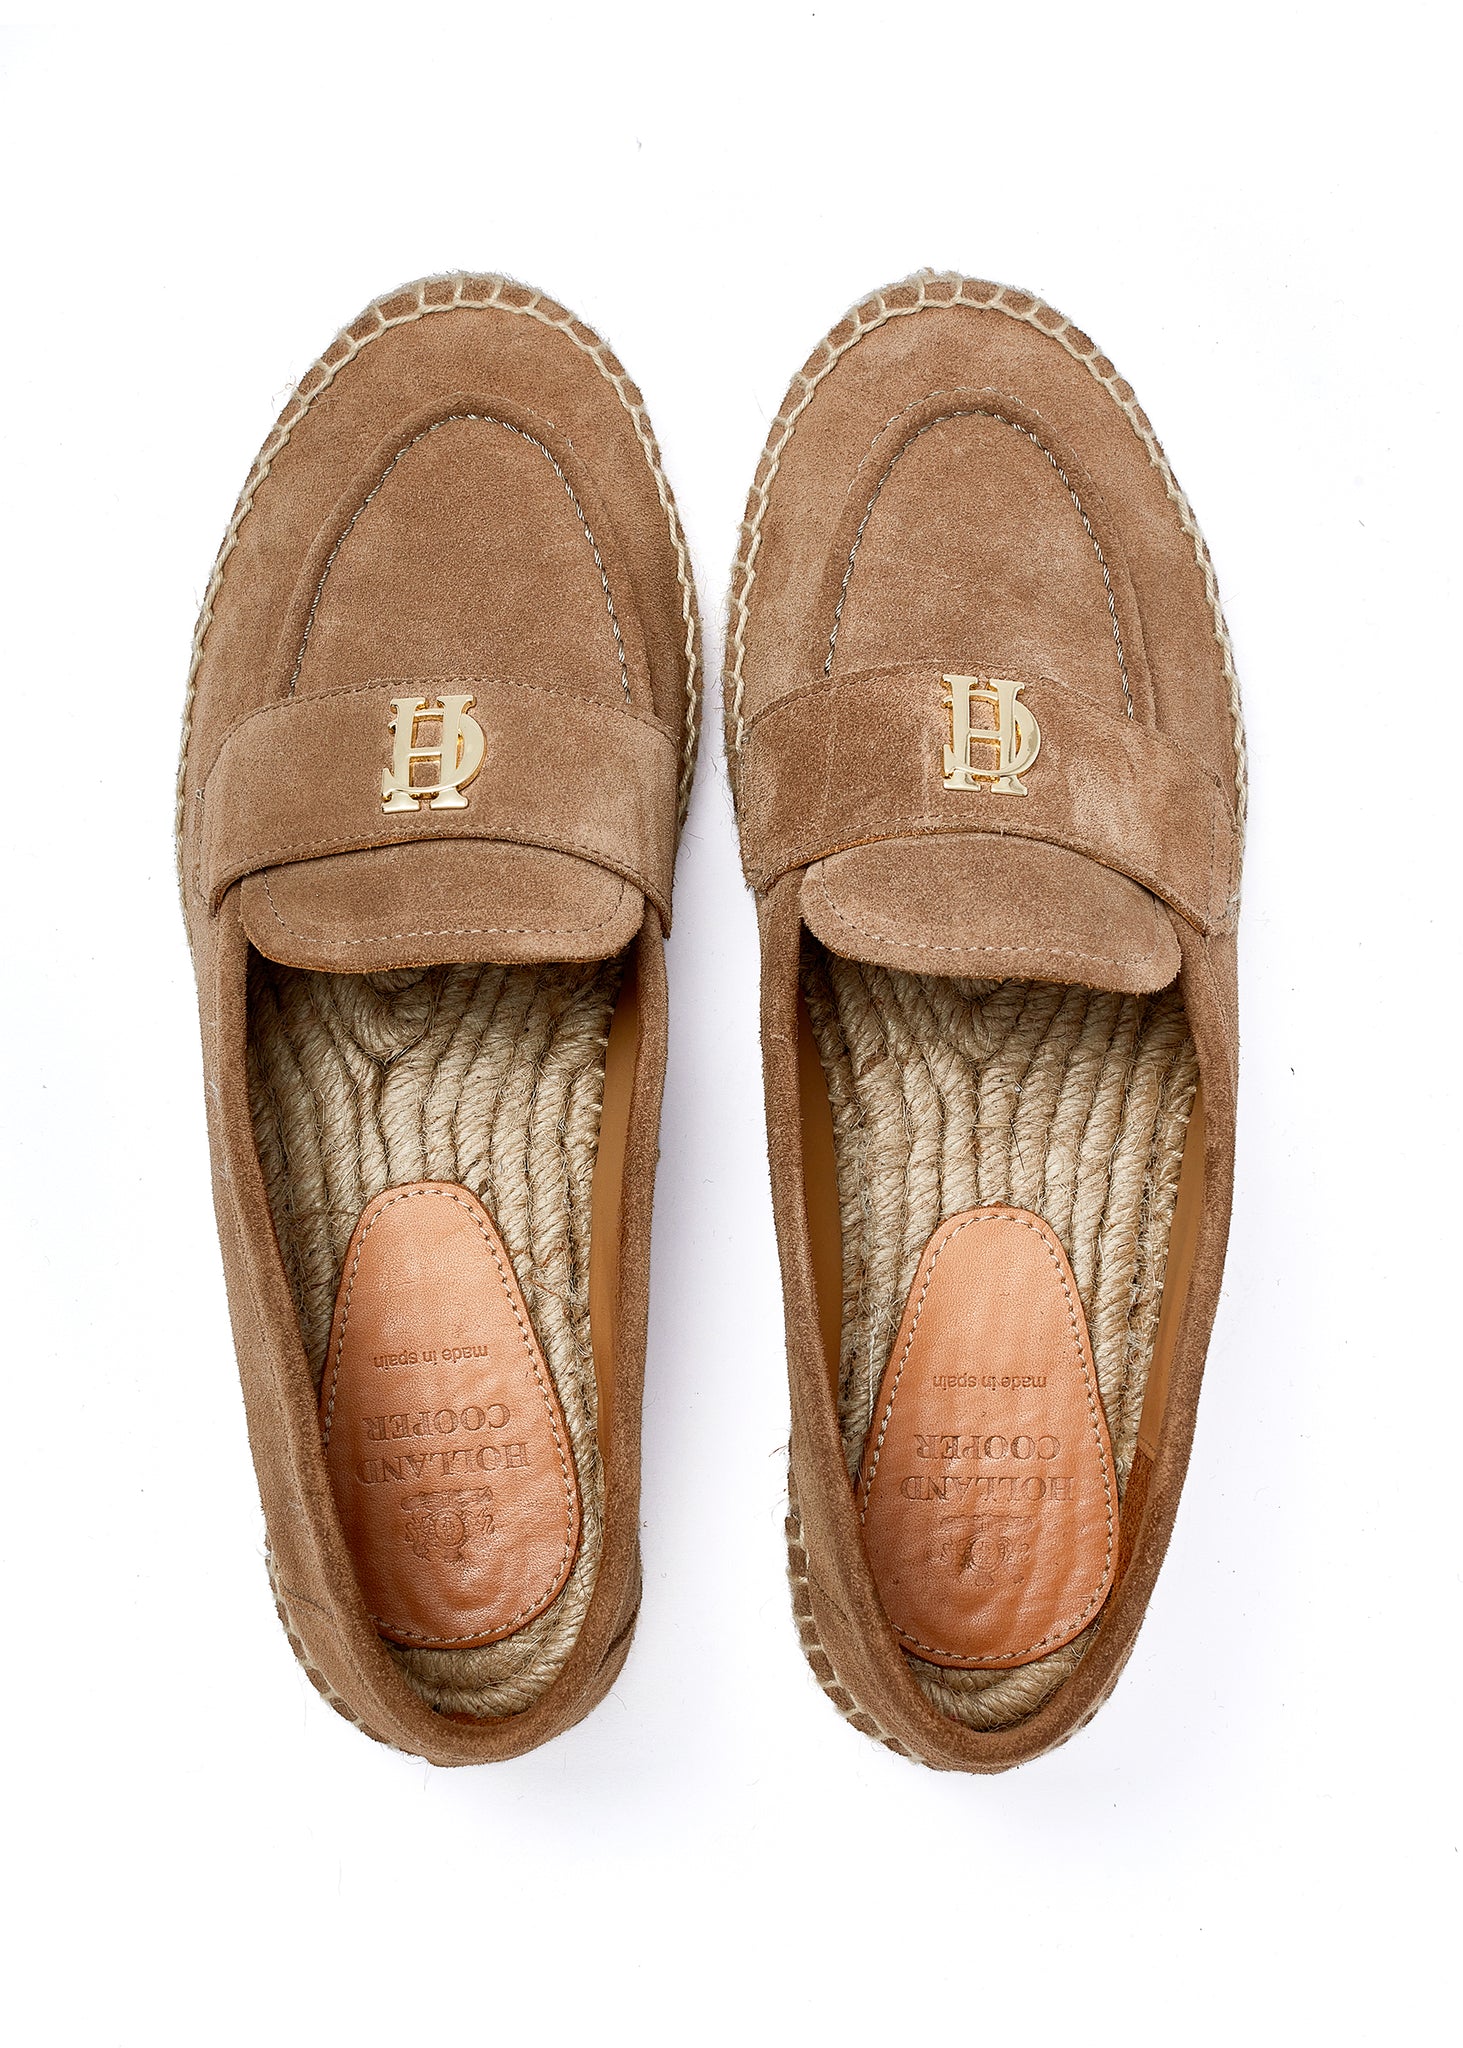 taupe suede espadrille with plaited jute sole and gold hardware on top and branded leather heel pad on the inner sole